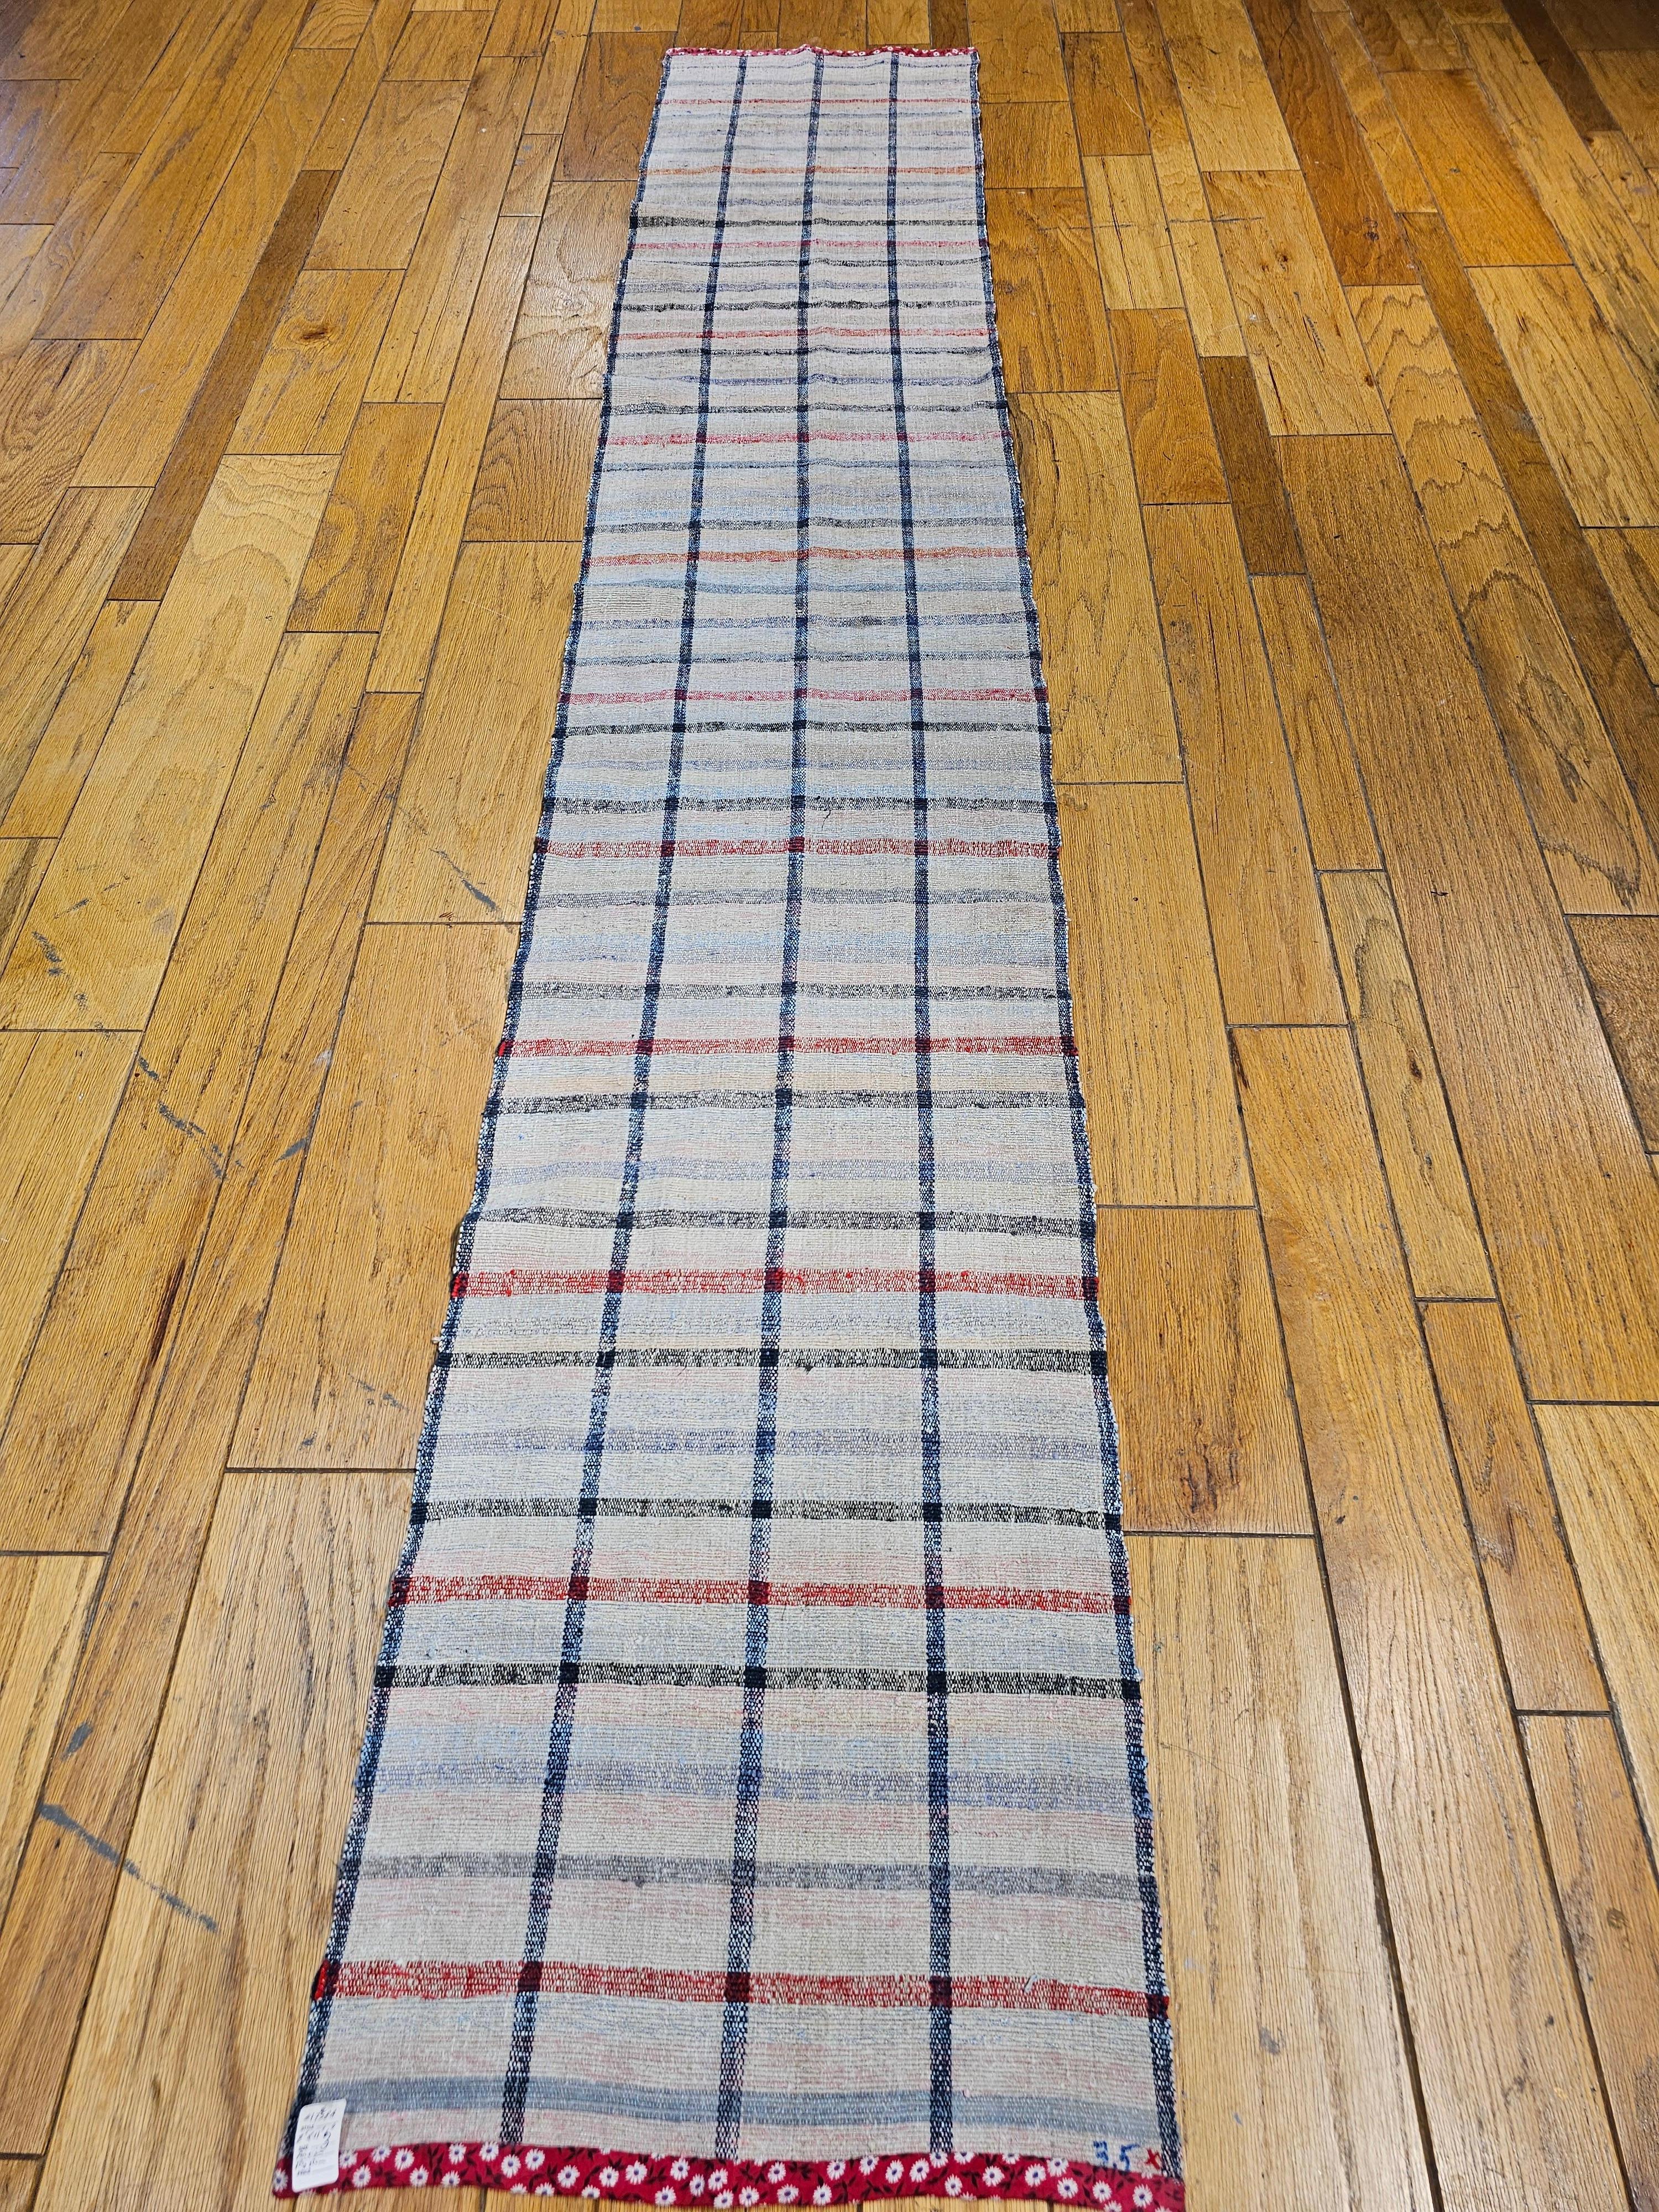 The vintage American Rag Runner has a cream color with primary stripes in indigo blue and red and secondary stripes in pale green and pink colors.  The rag runner has an identical pair (SKU 1758A).  They can be bought individually or as a pair.  